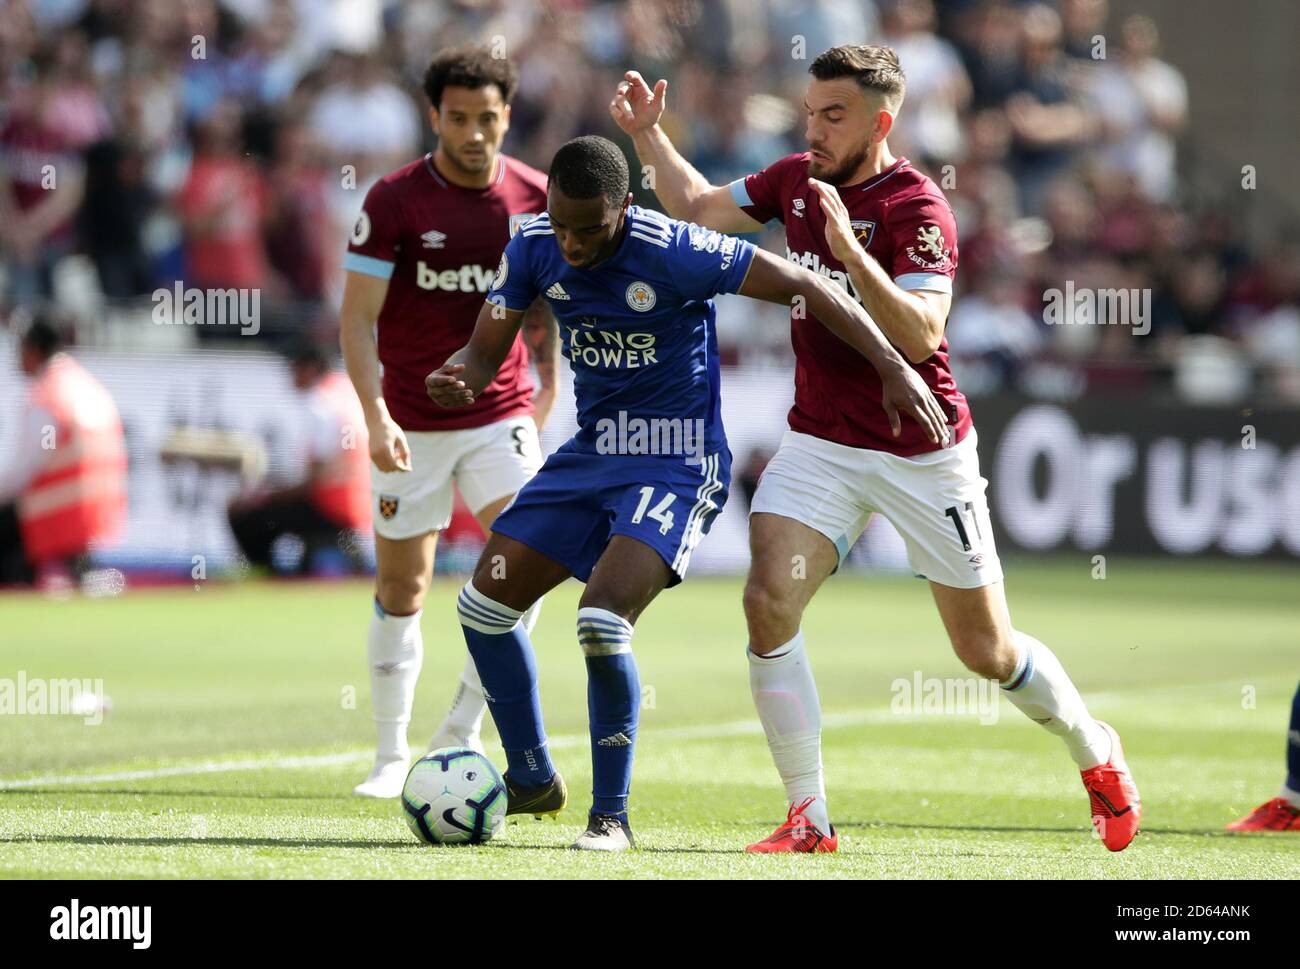 Leicester City's Ricardo Pereira (left) and West Ham United's Robert Snodgrass battle for the ball Stock Photo